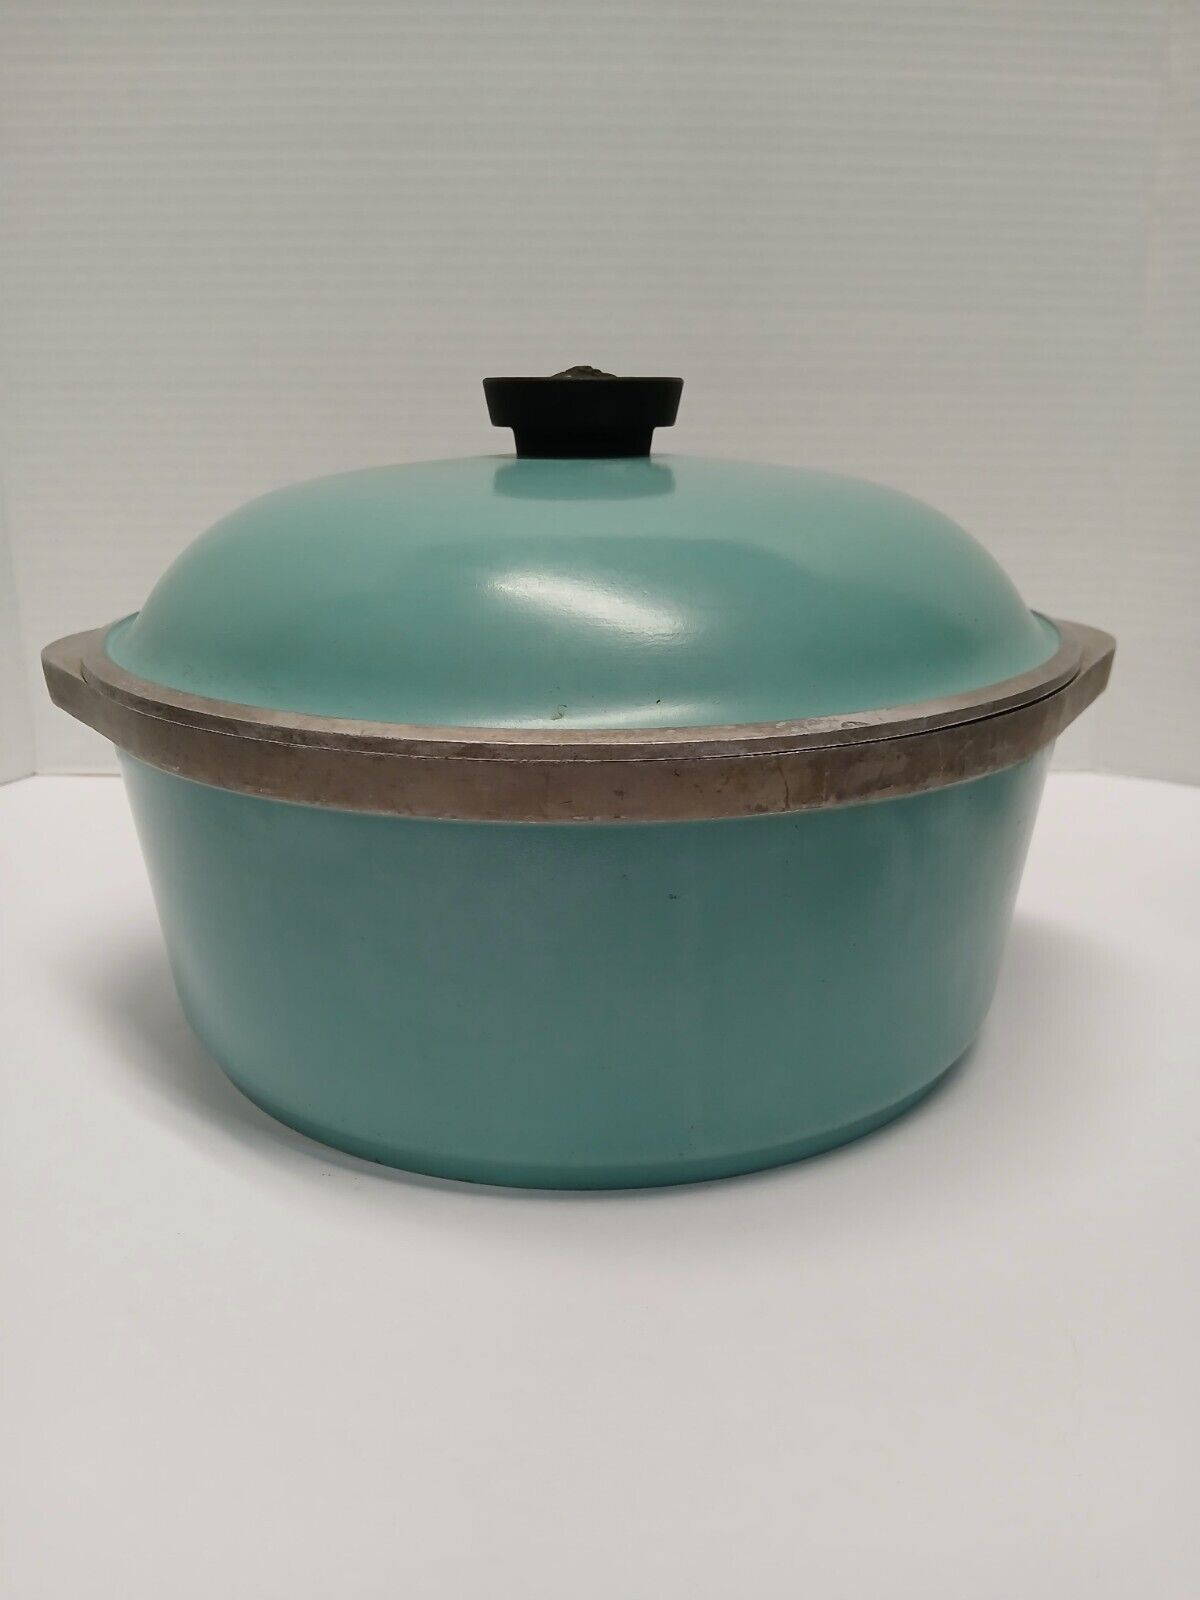 Vintage CLUB ALUMINUM Dutch Oven Roasting Pan w/ Lid Turquoise Cookware